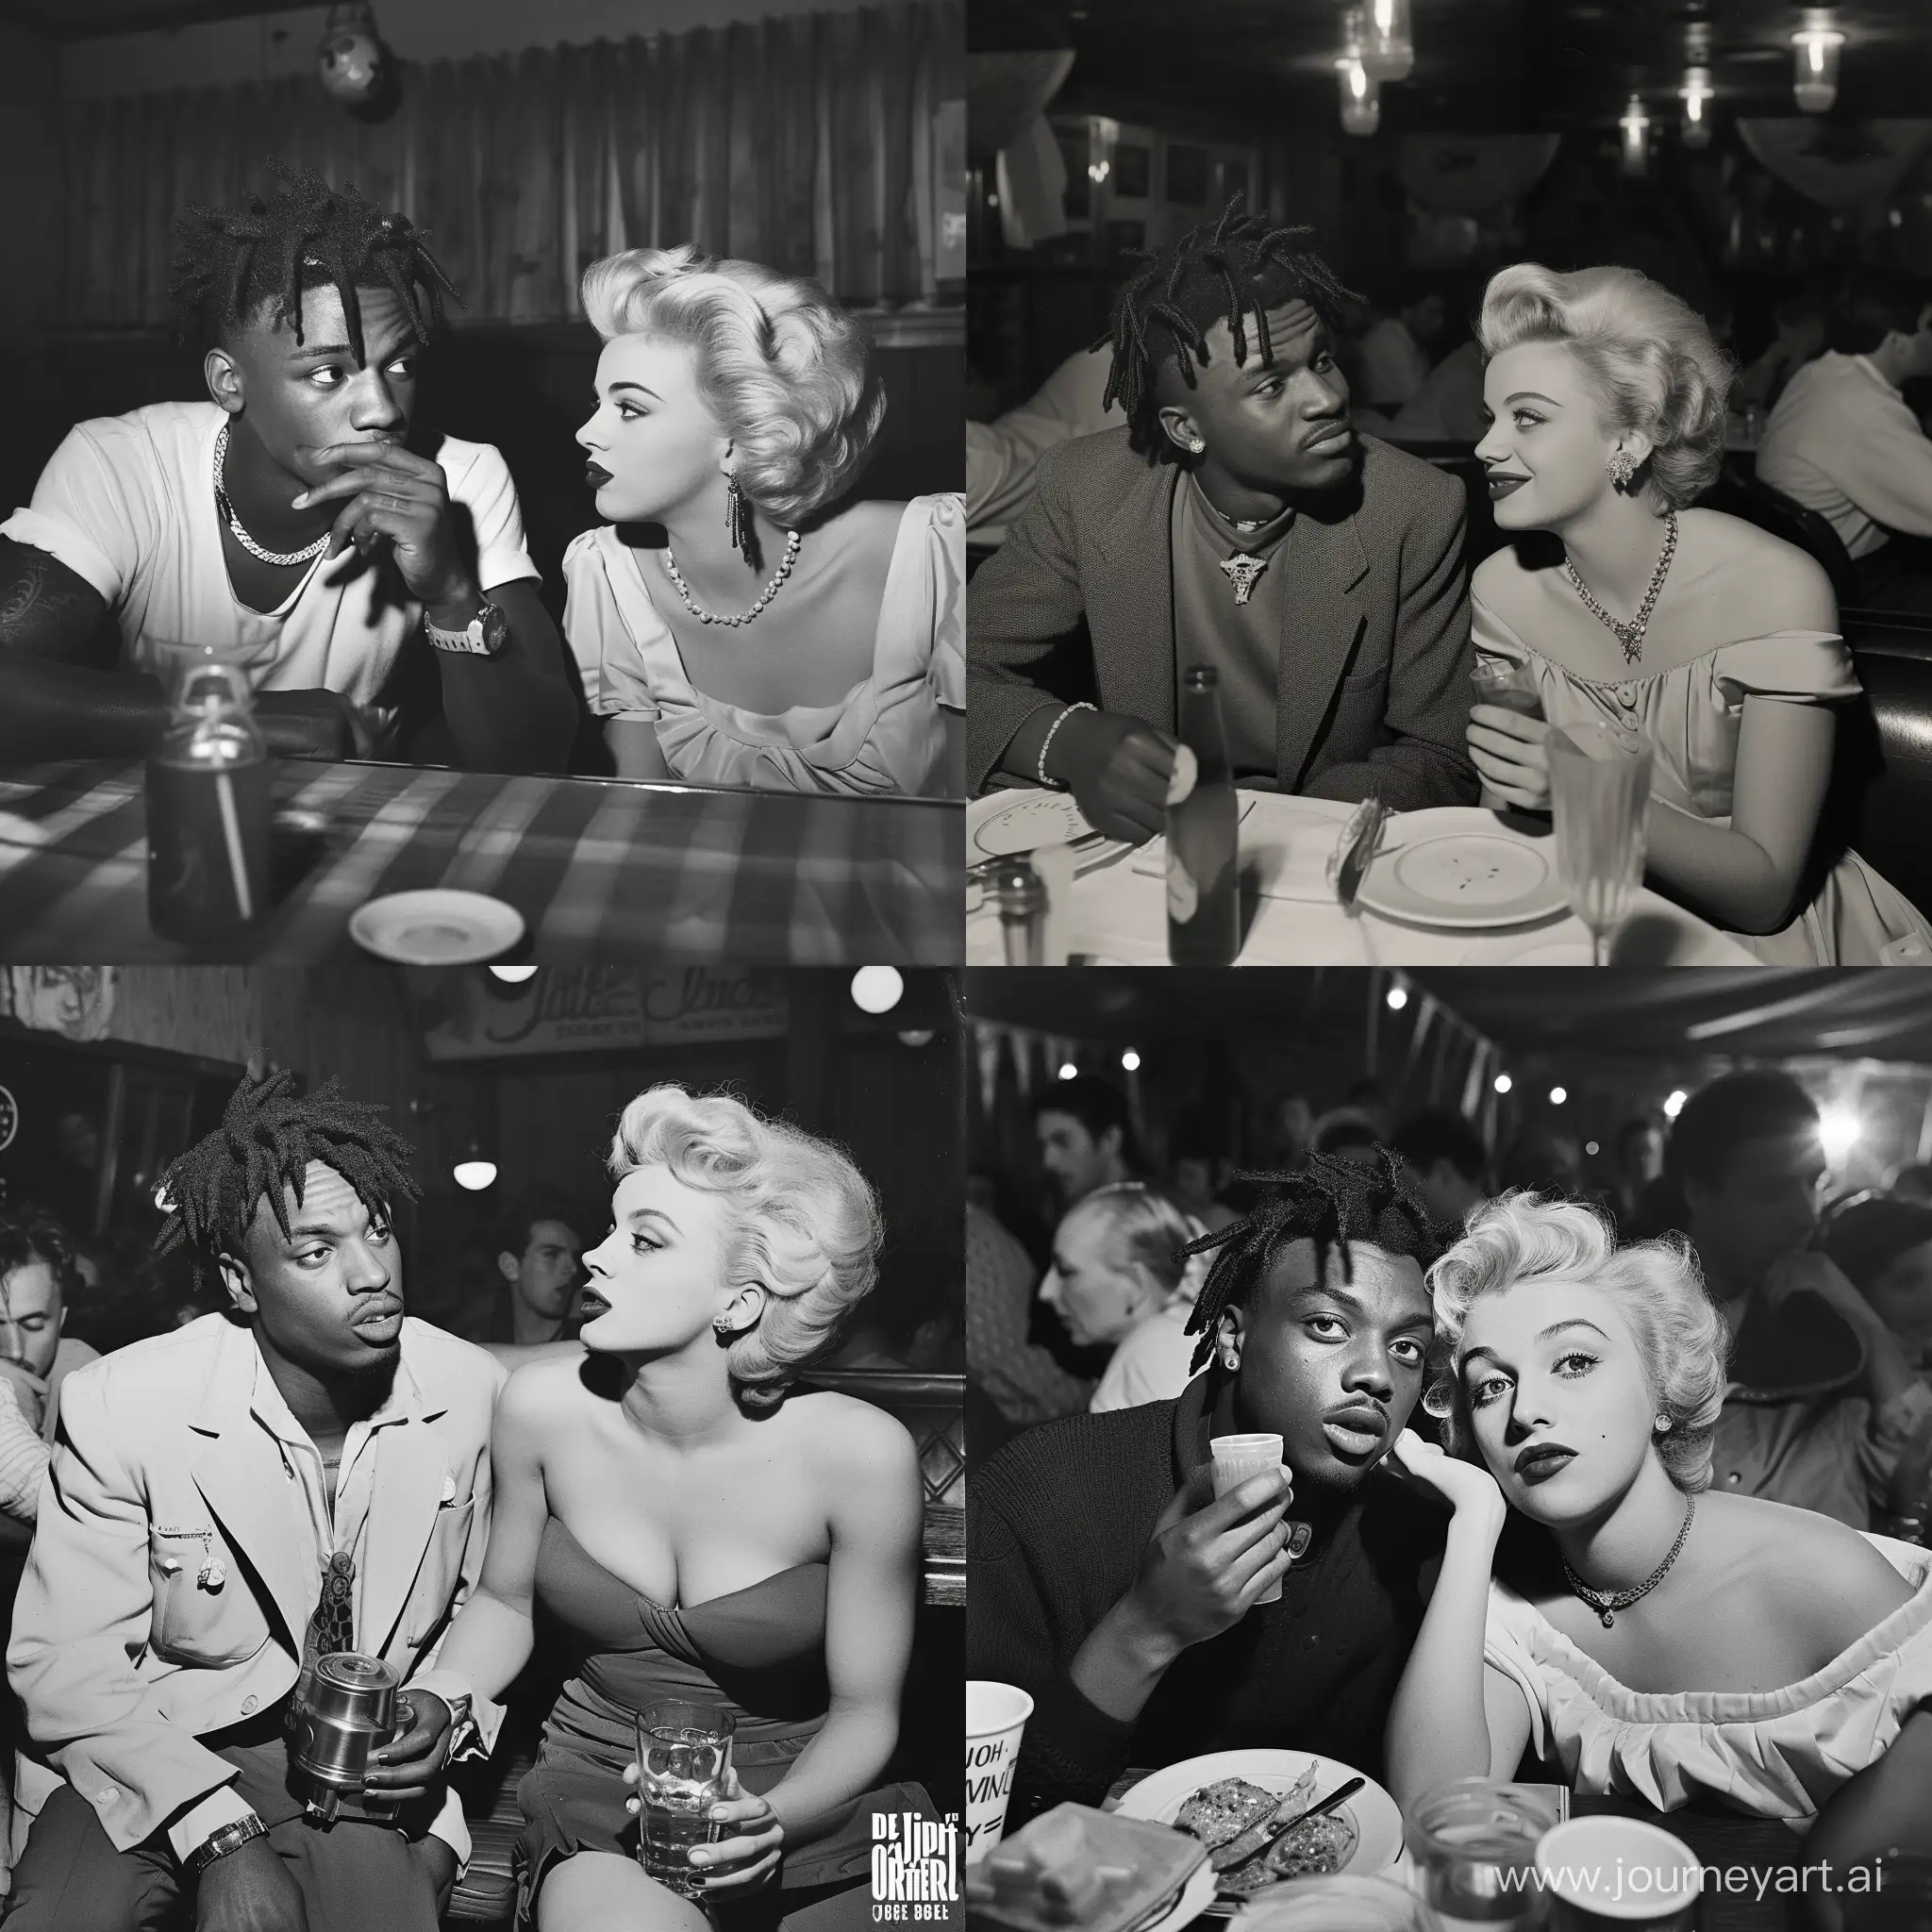 Vintage-Date-Juice-WRLD-and-Marilyn-Monroe-in-a-1950s-Black-and-White-Photograph